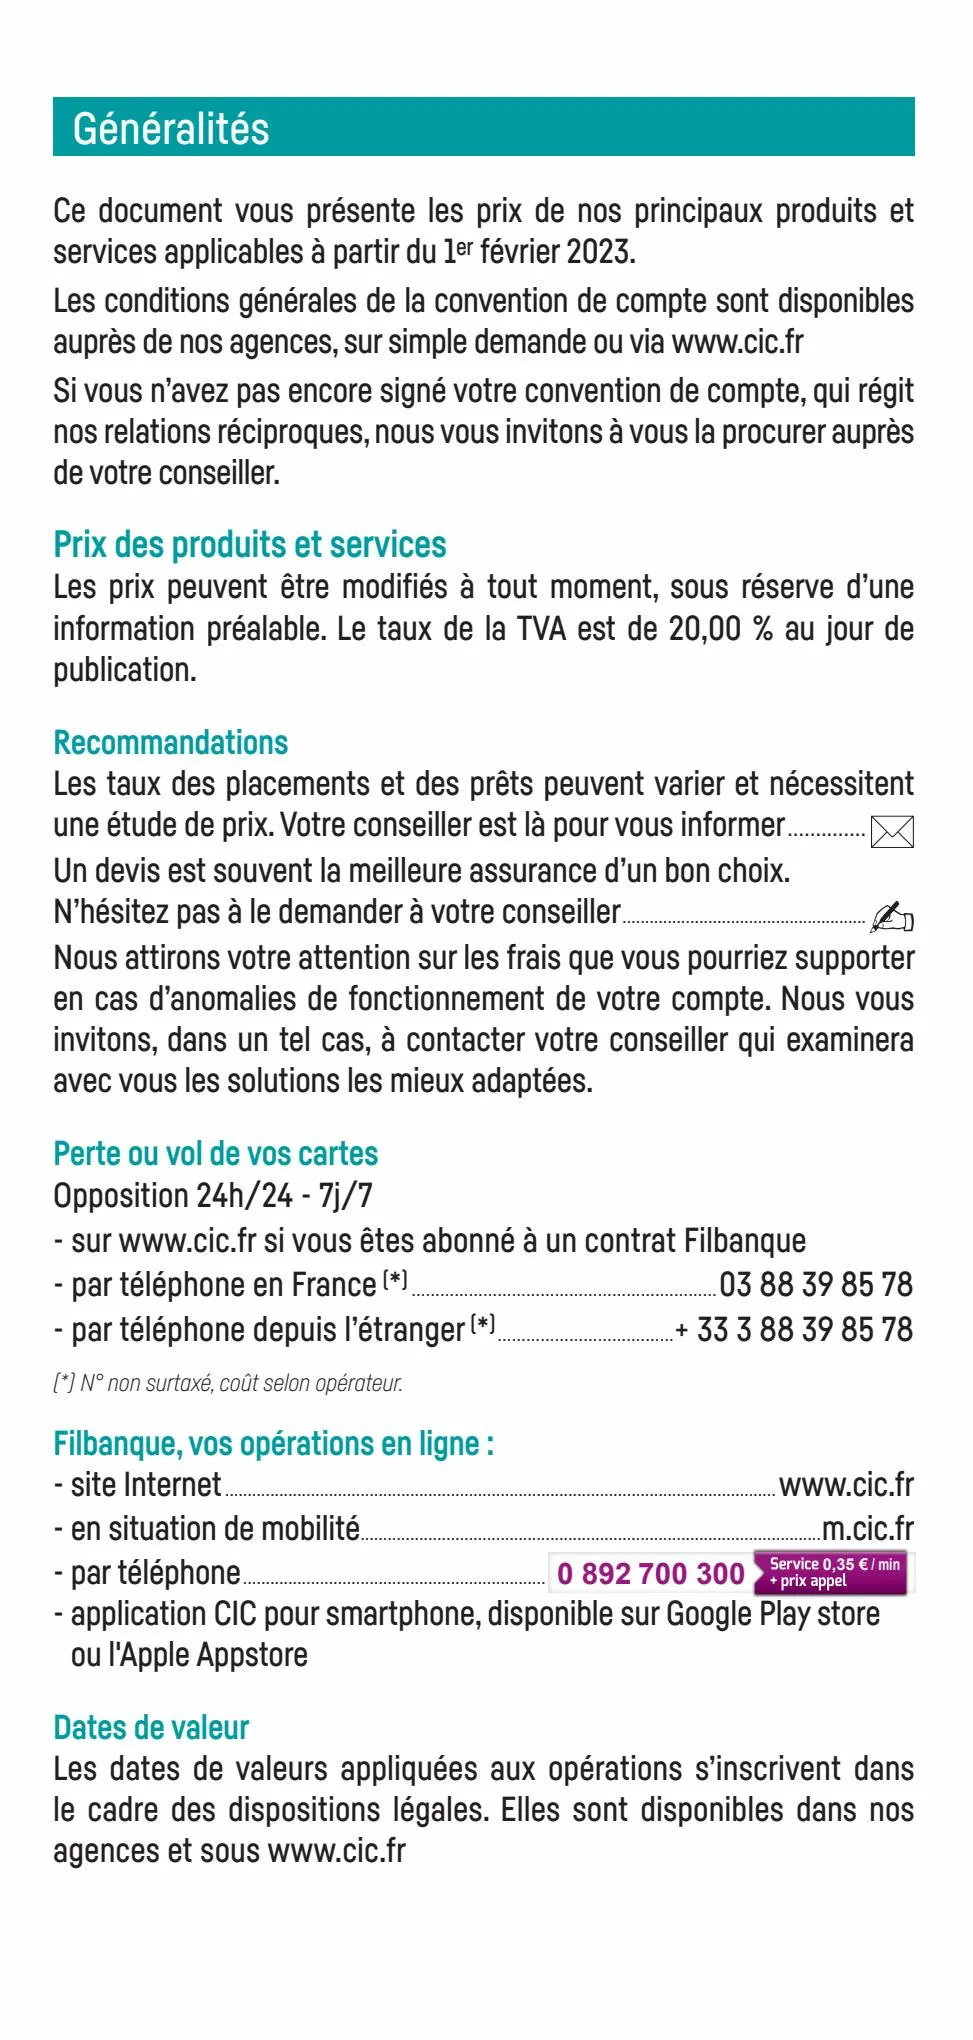 Catalogue Particuliers 2023, page 00002